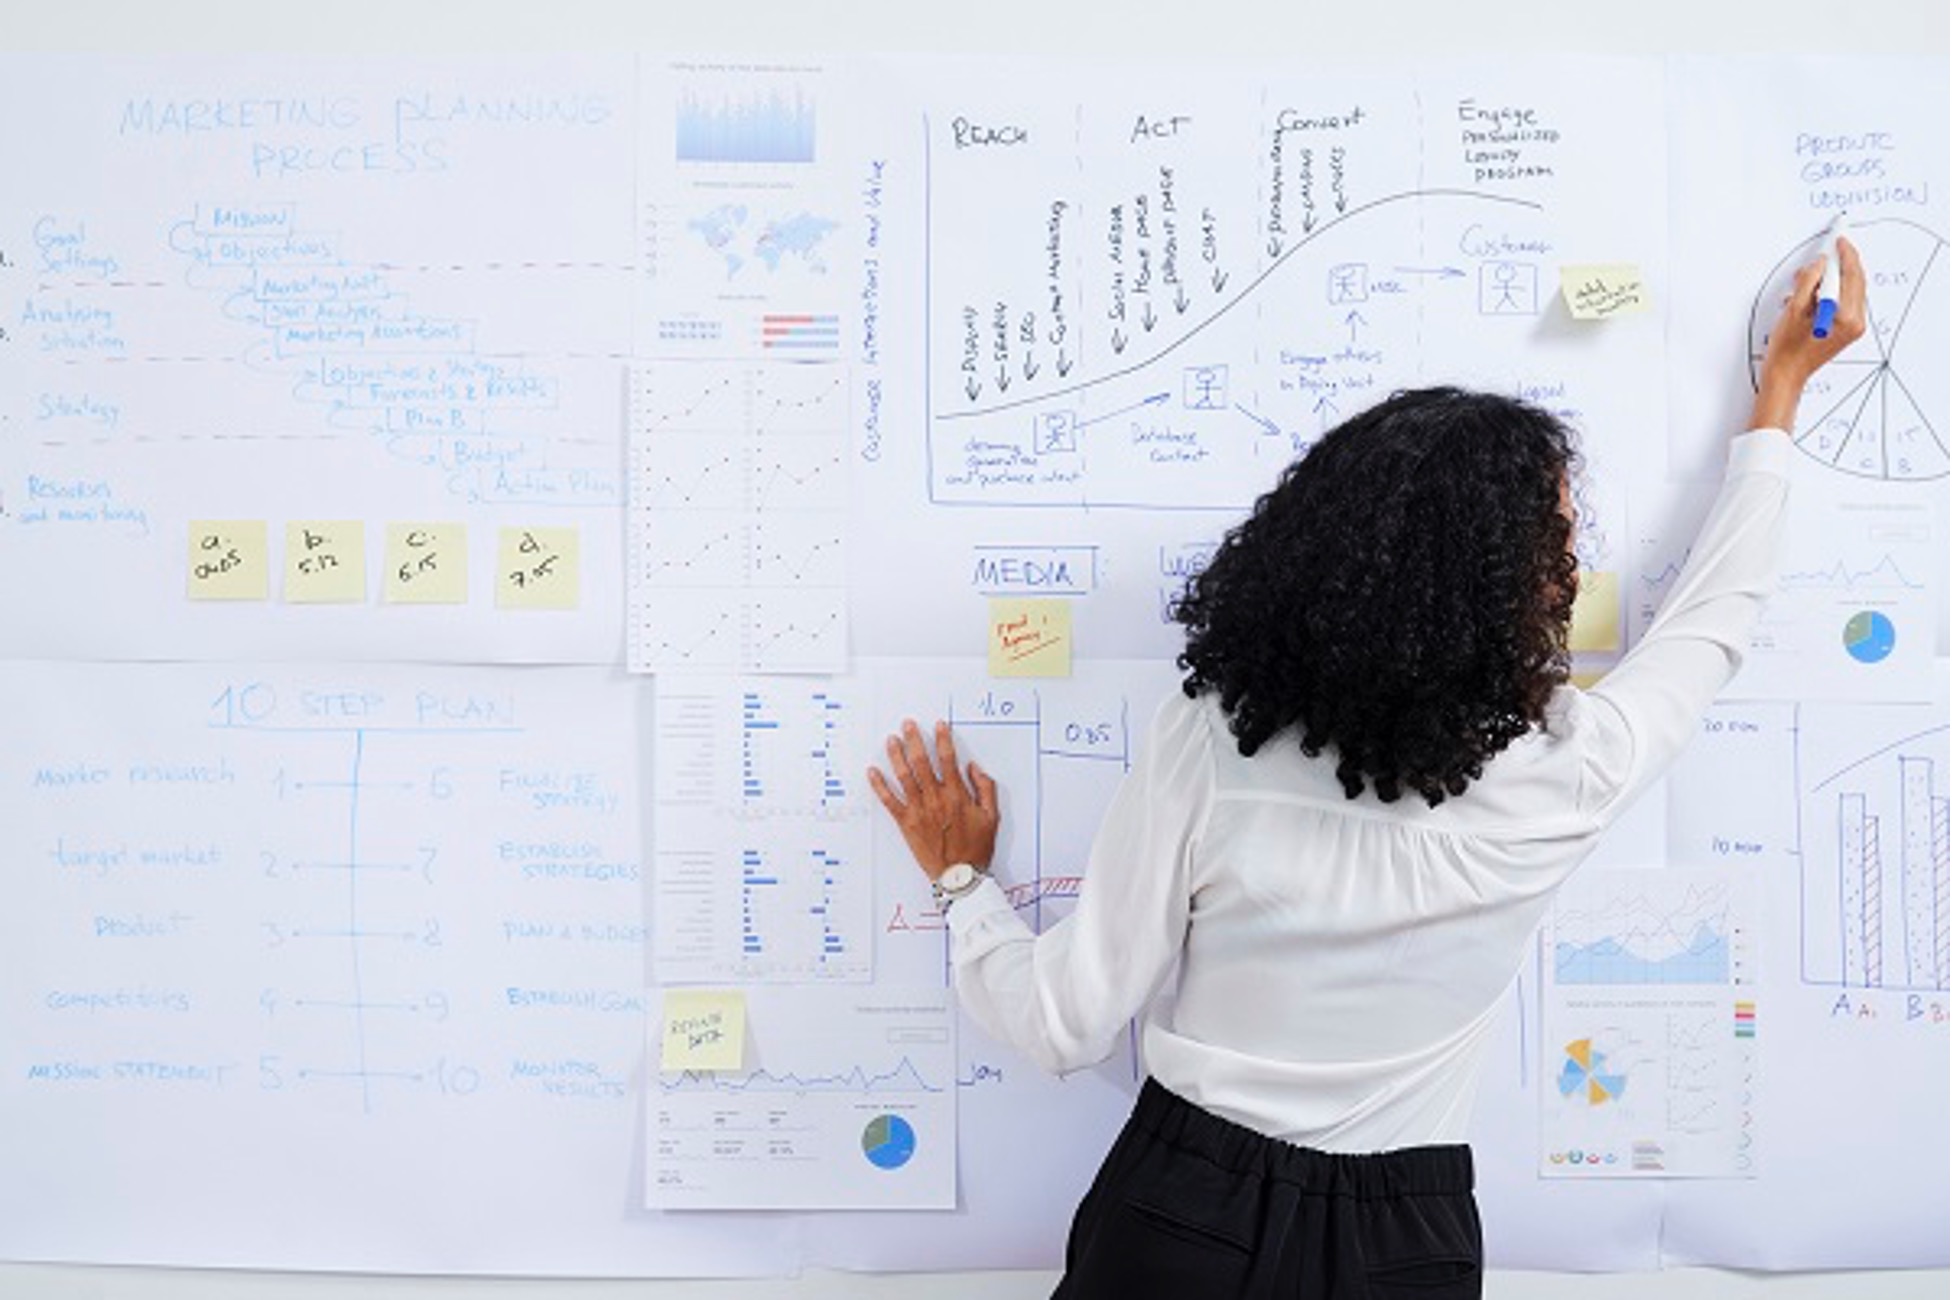 Woman using a whiteboard to lay out business ideas